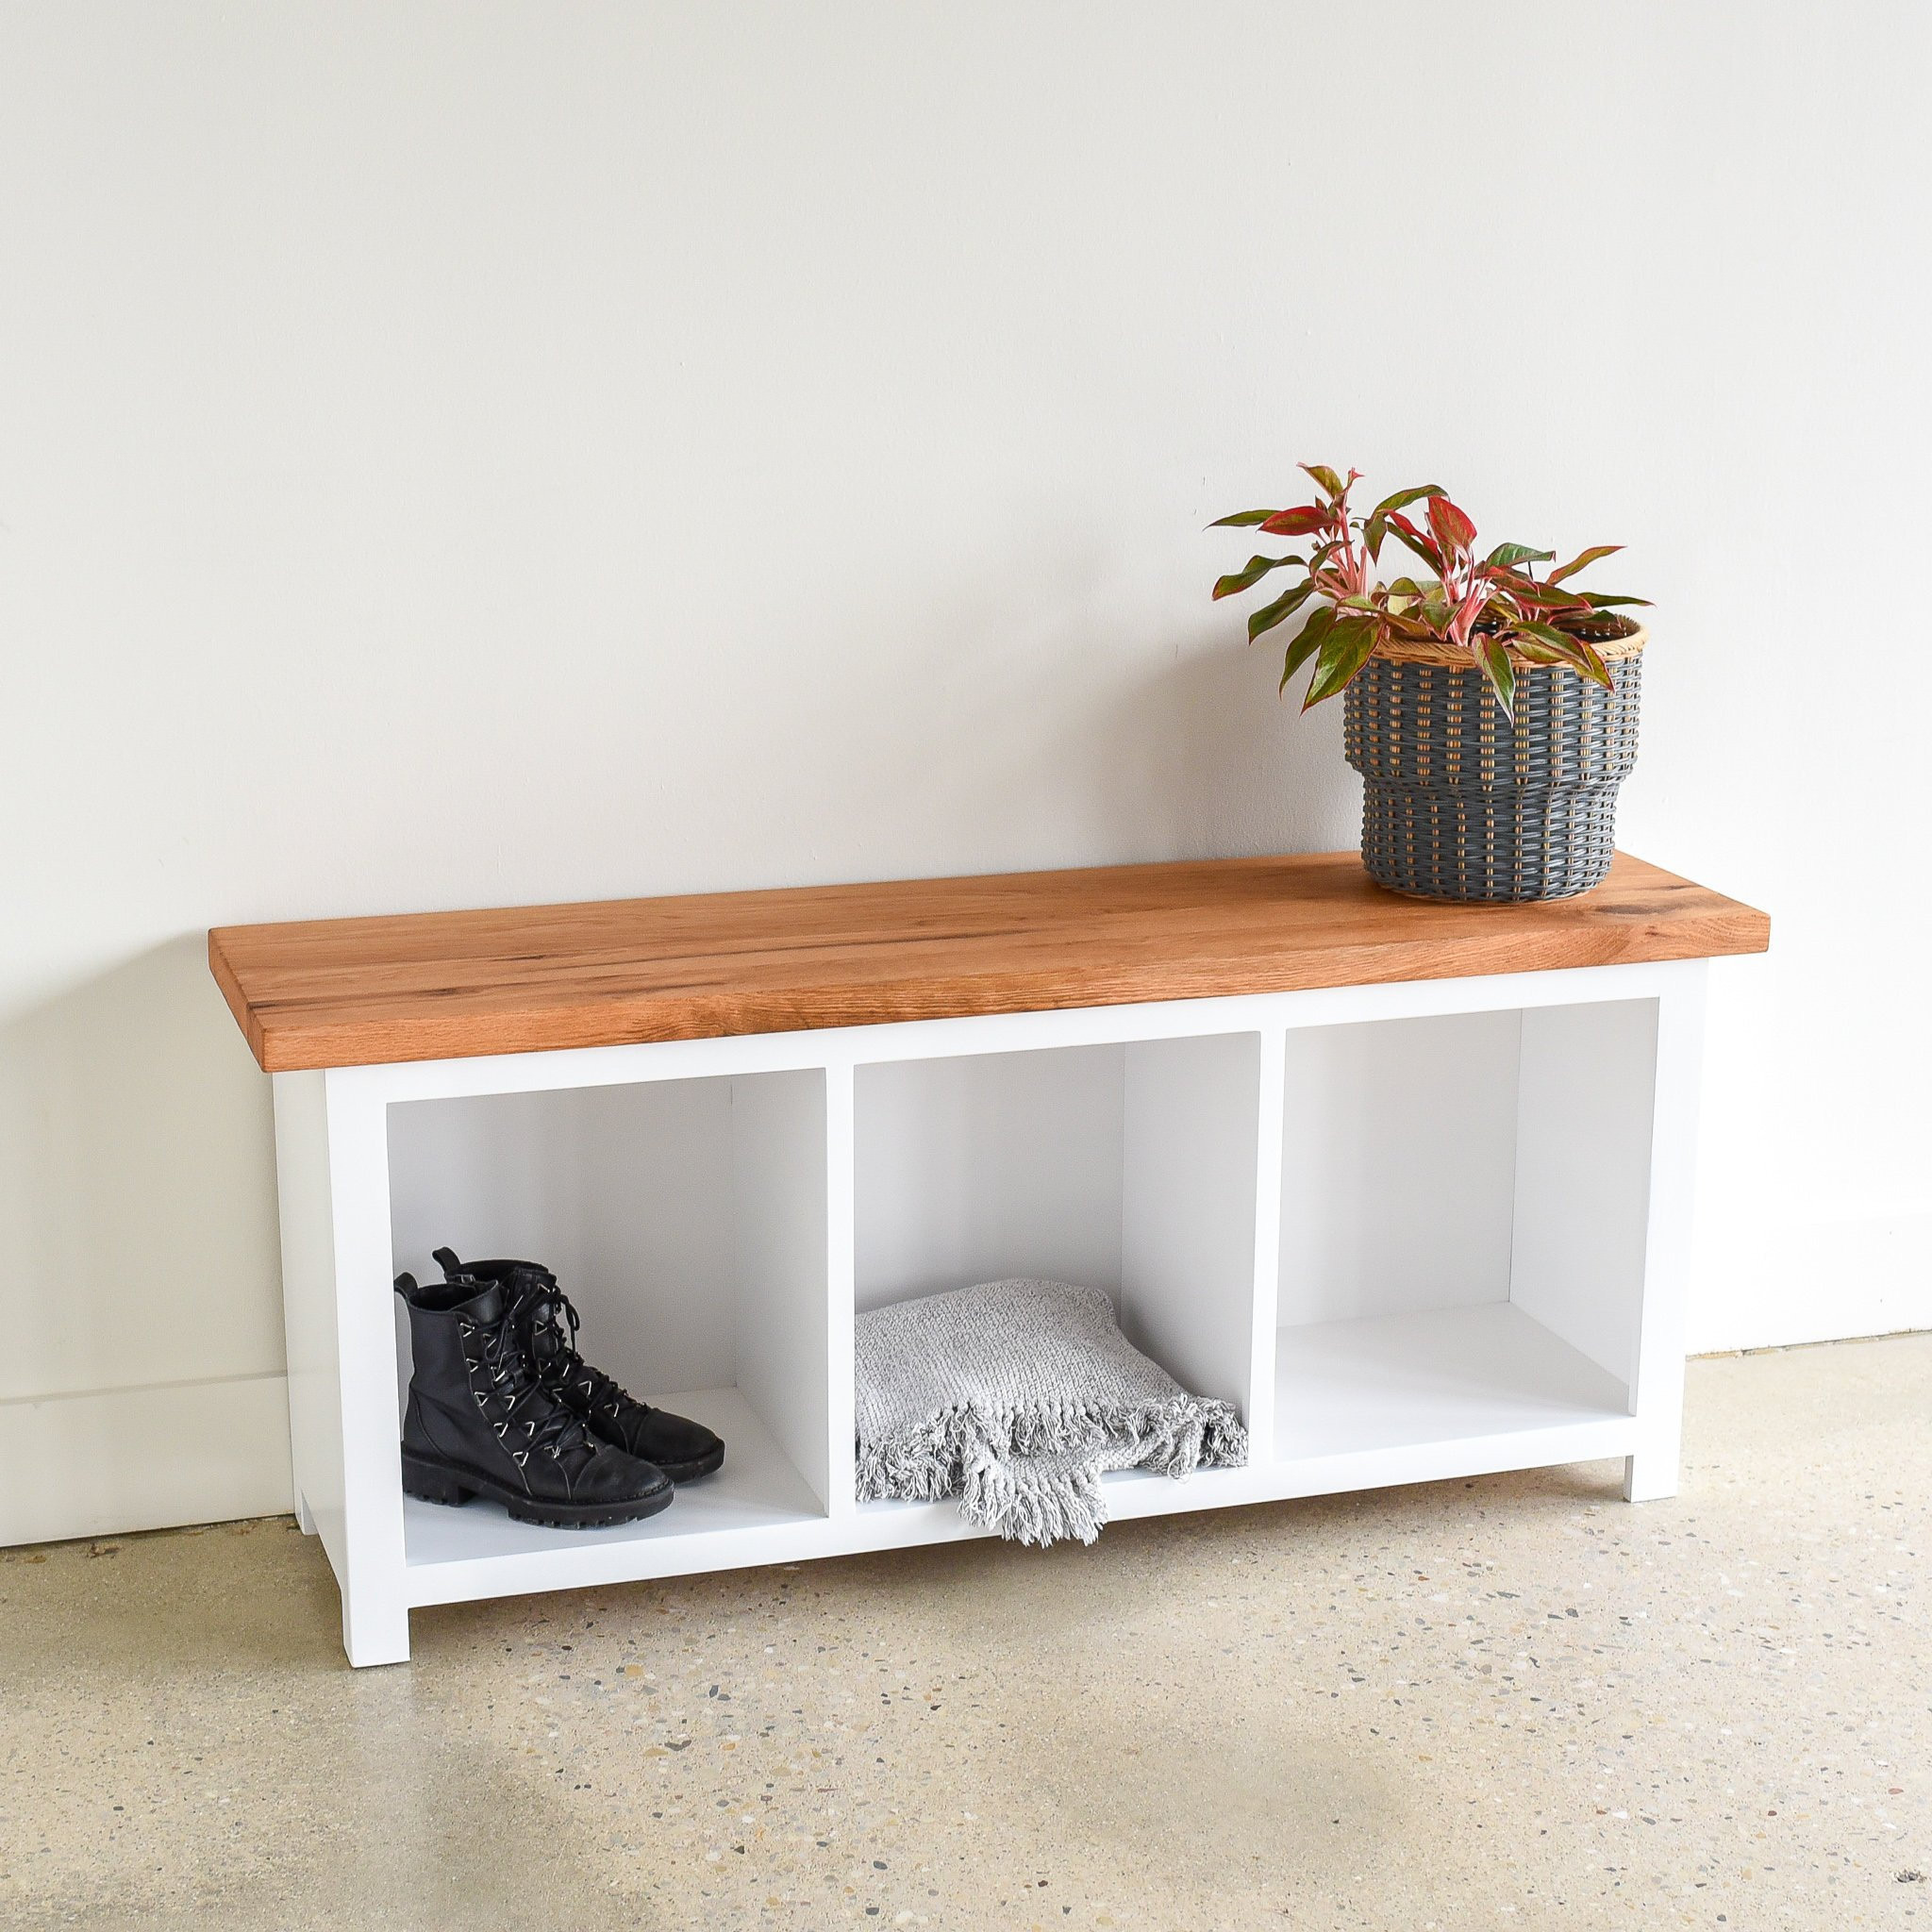 White Cubby Storage Bench
 Wood White Storage Bench Reclaimed Cubby Bench